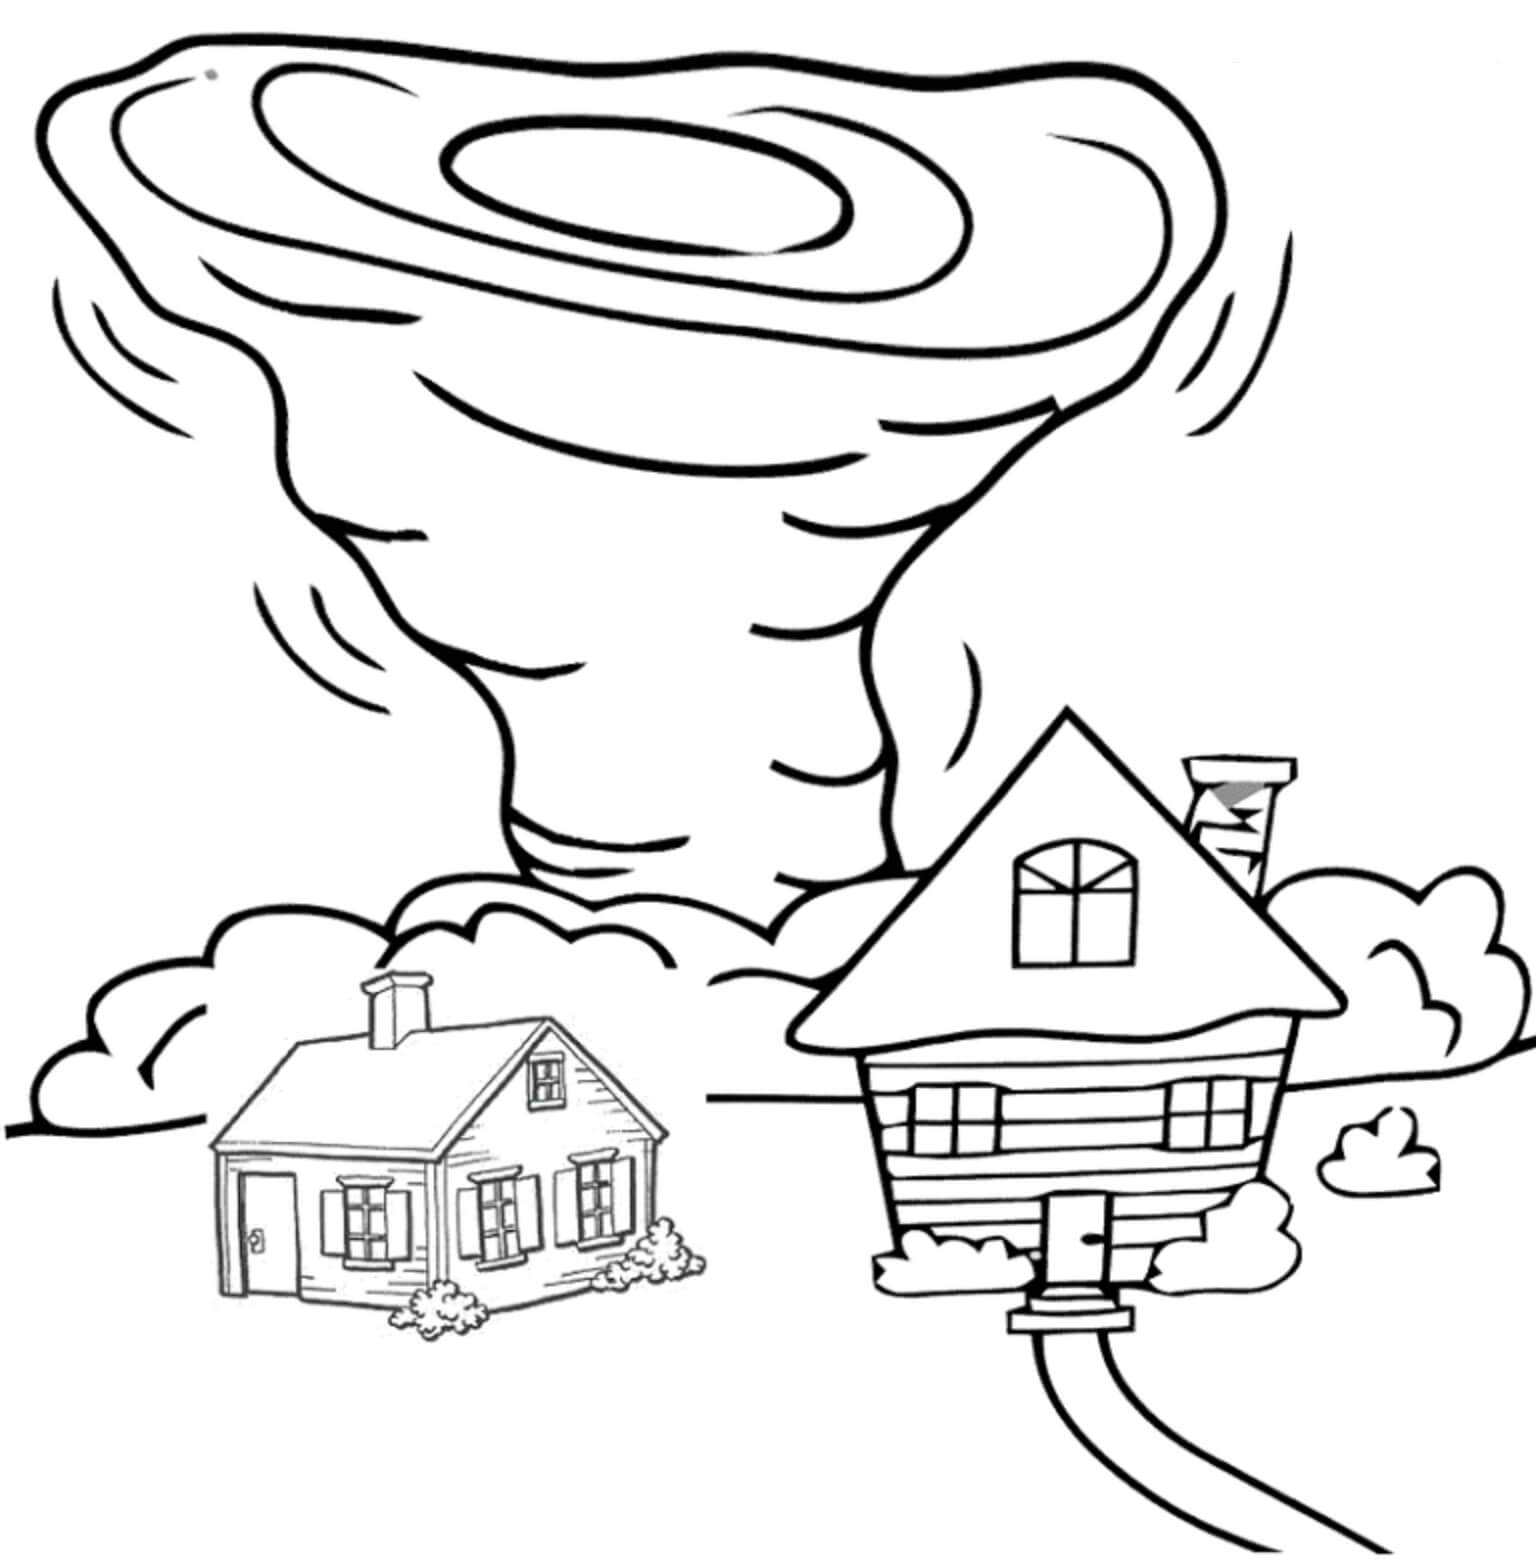 Tornado with two Houses